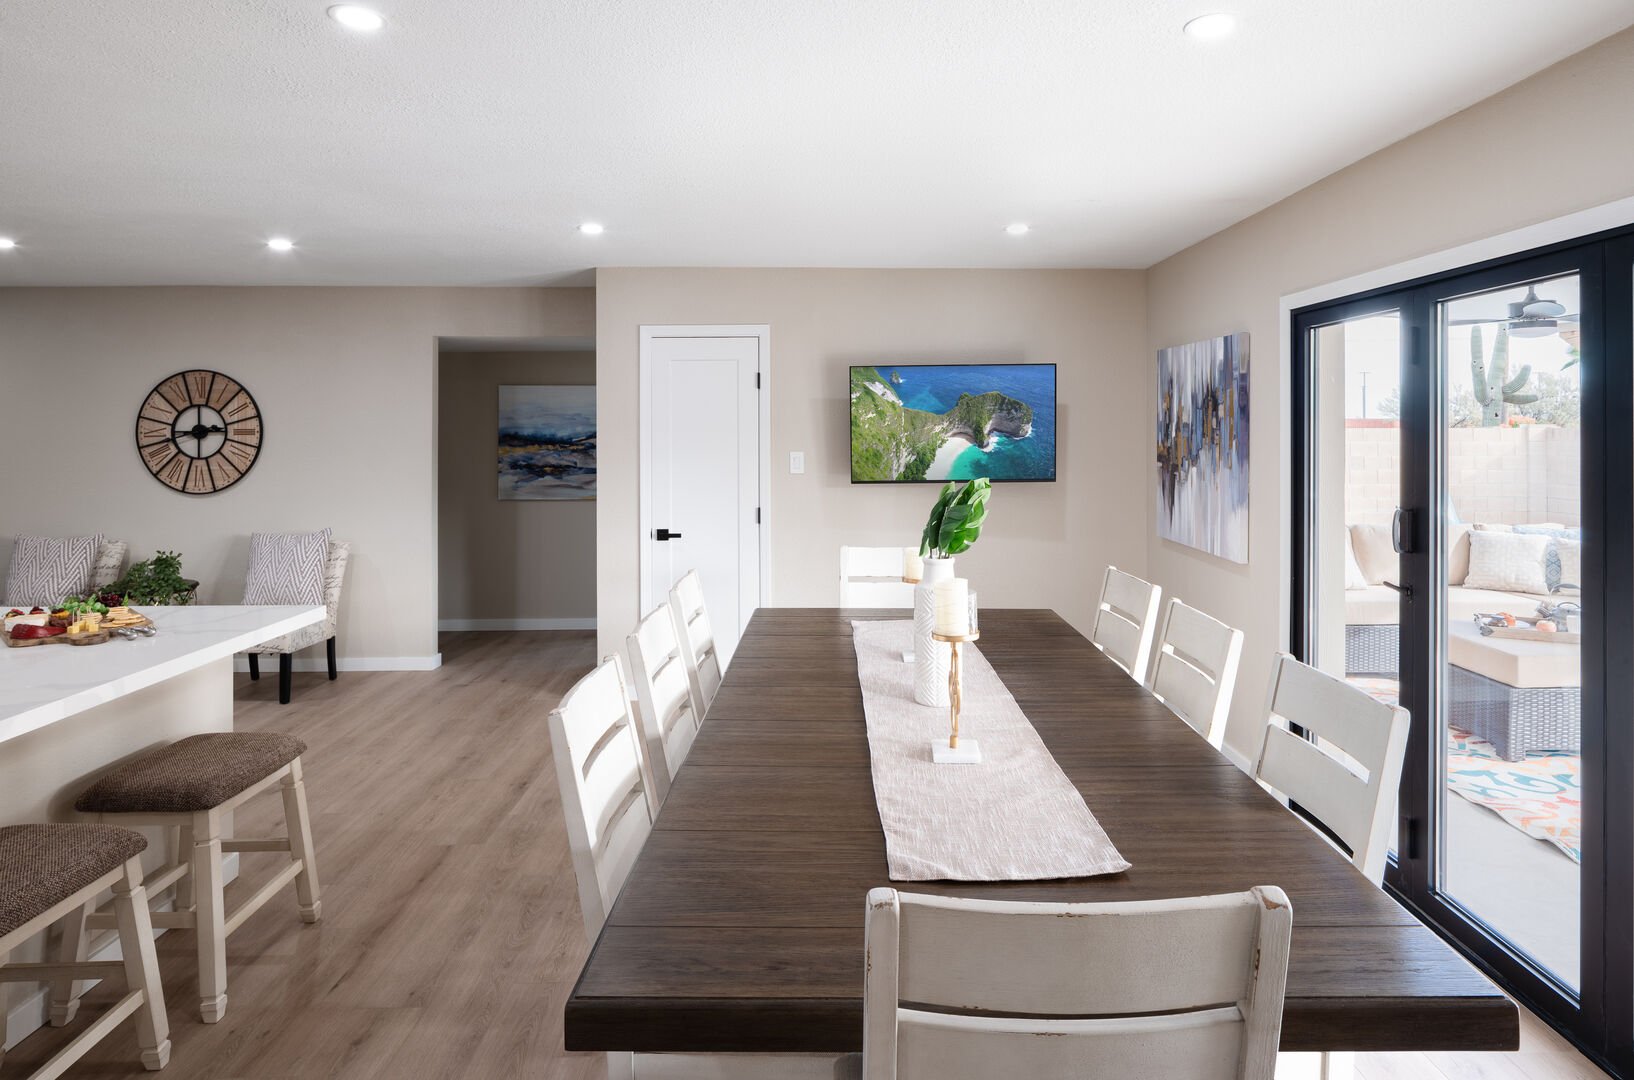 Dining area in kitchen with large accordion opening doors, Smart TV, and direct access to kitchen.